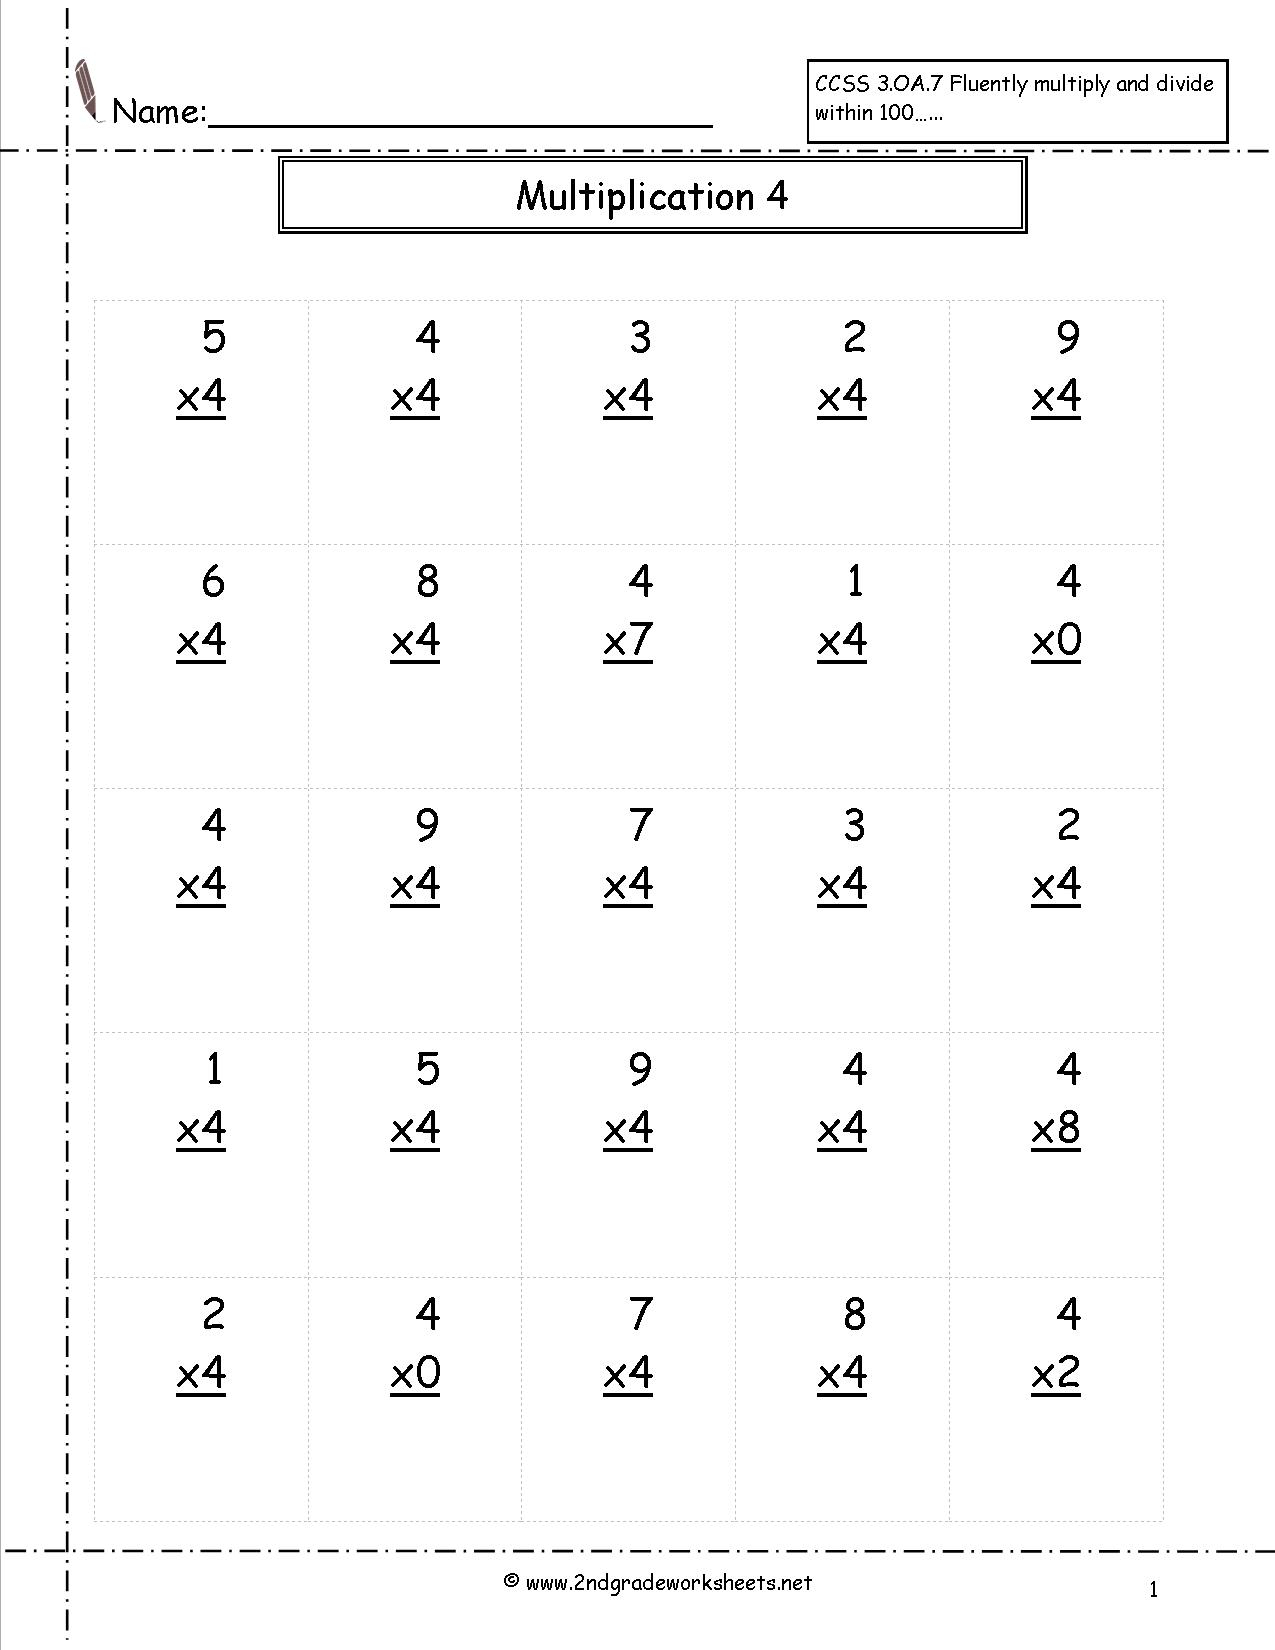 Multiplication Worksheets And Printouts with regard to Multiplication Worksheets How To